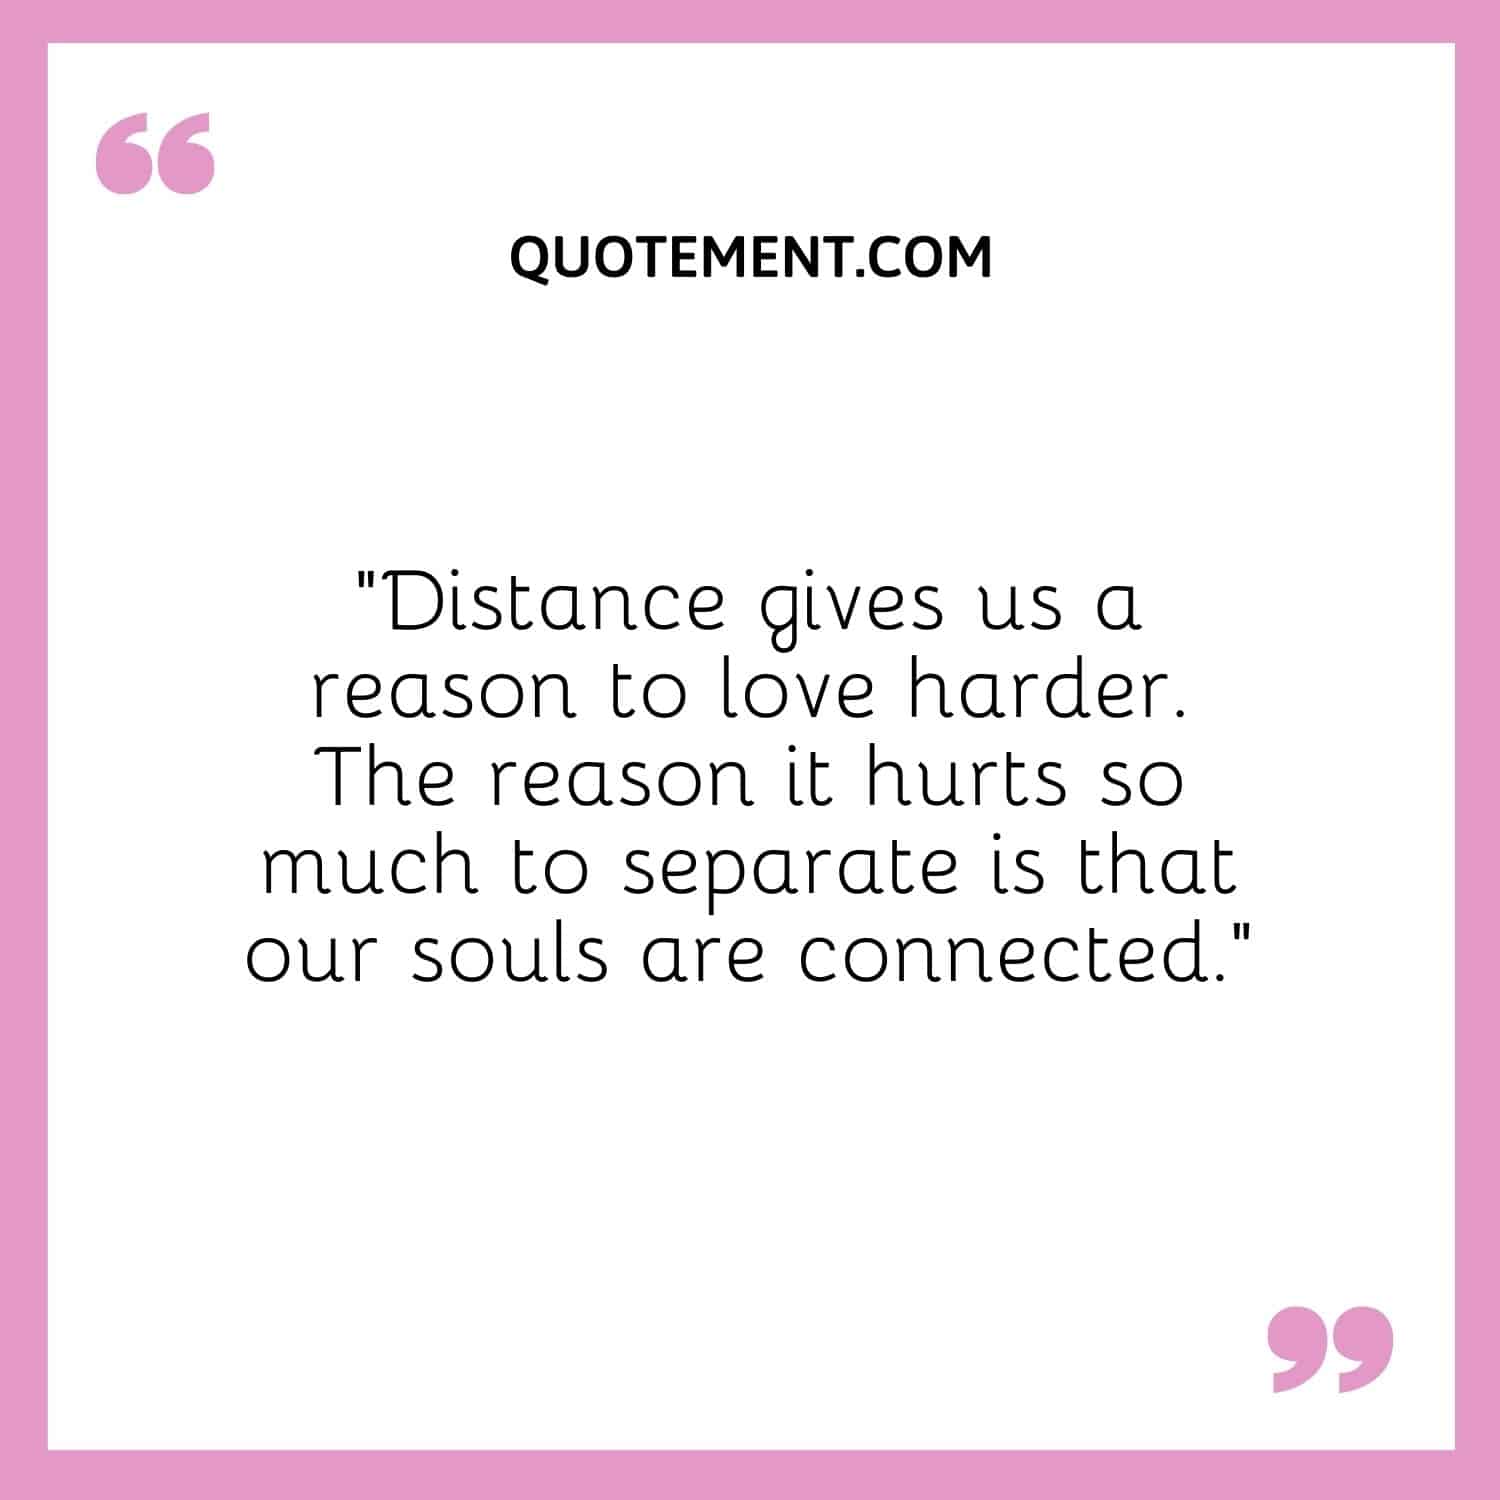 “Distance gives us a reason to love harder. The reason it hurts so much to separate is that our souls are connected.”